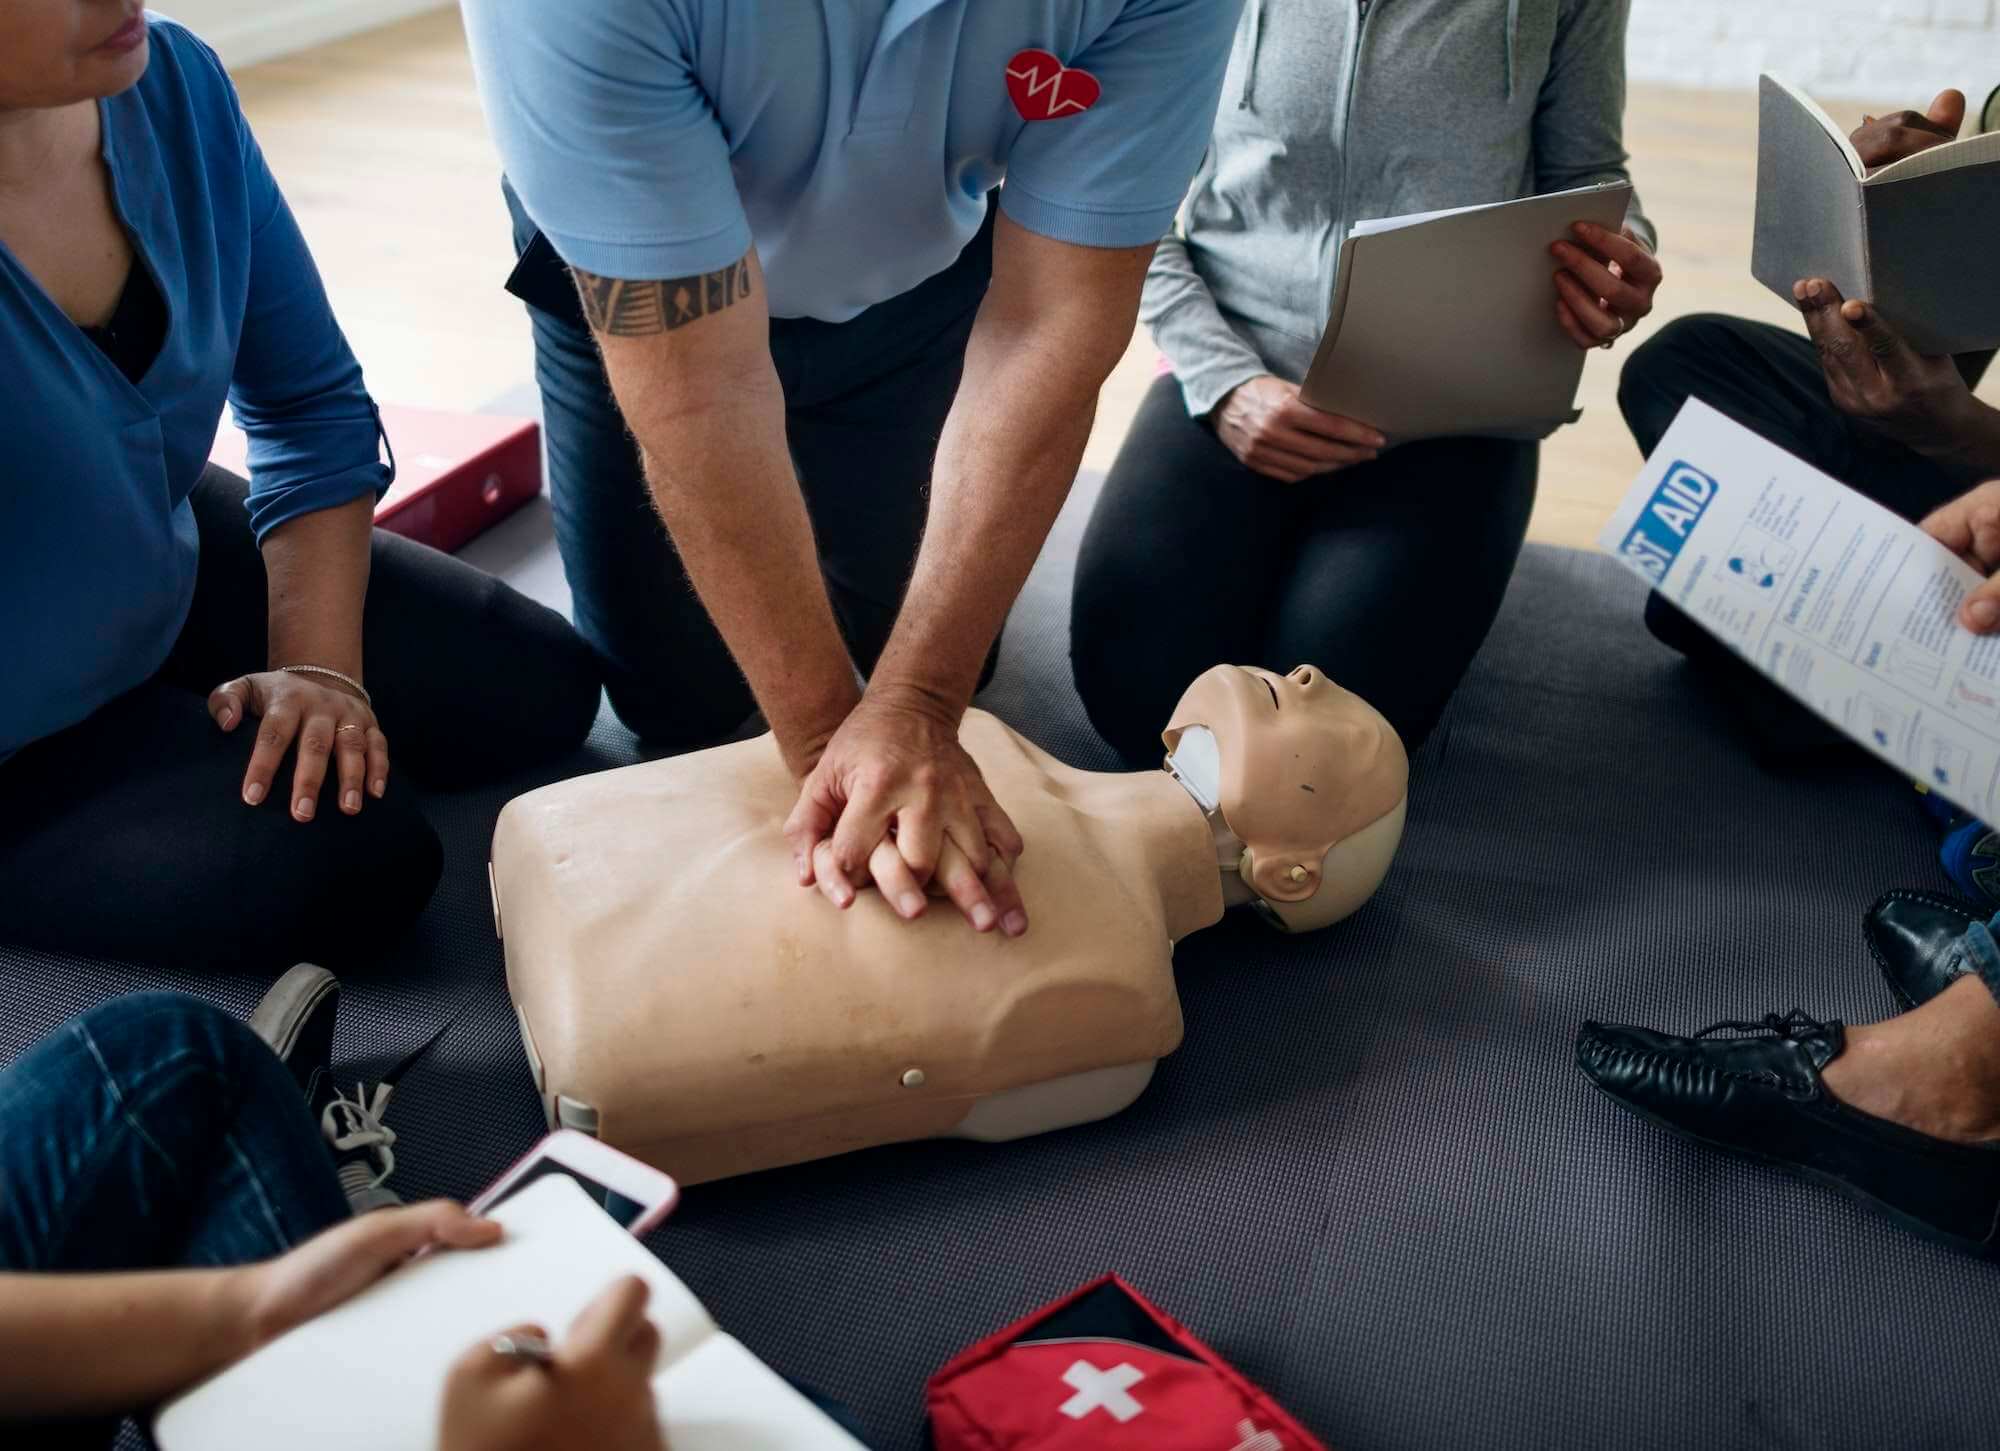 First Aid Training - Essential for the Construction Industry